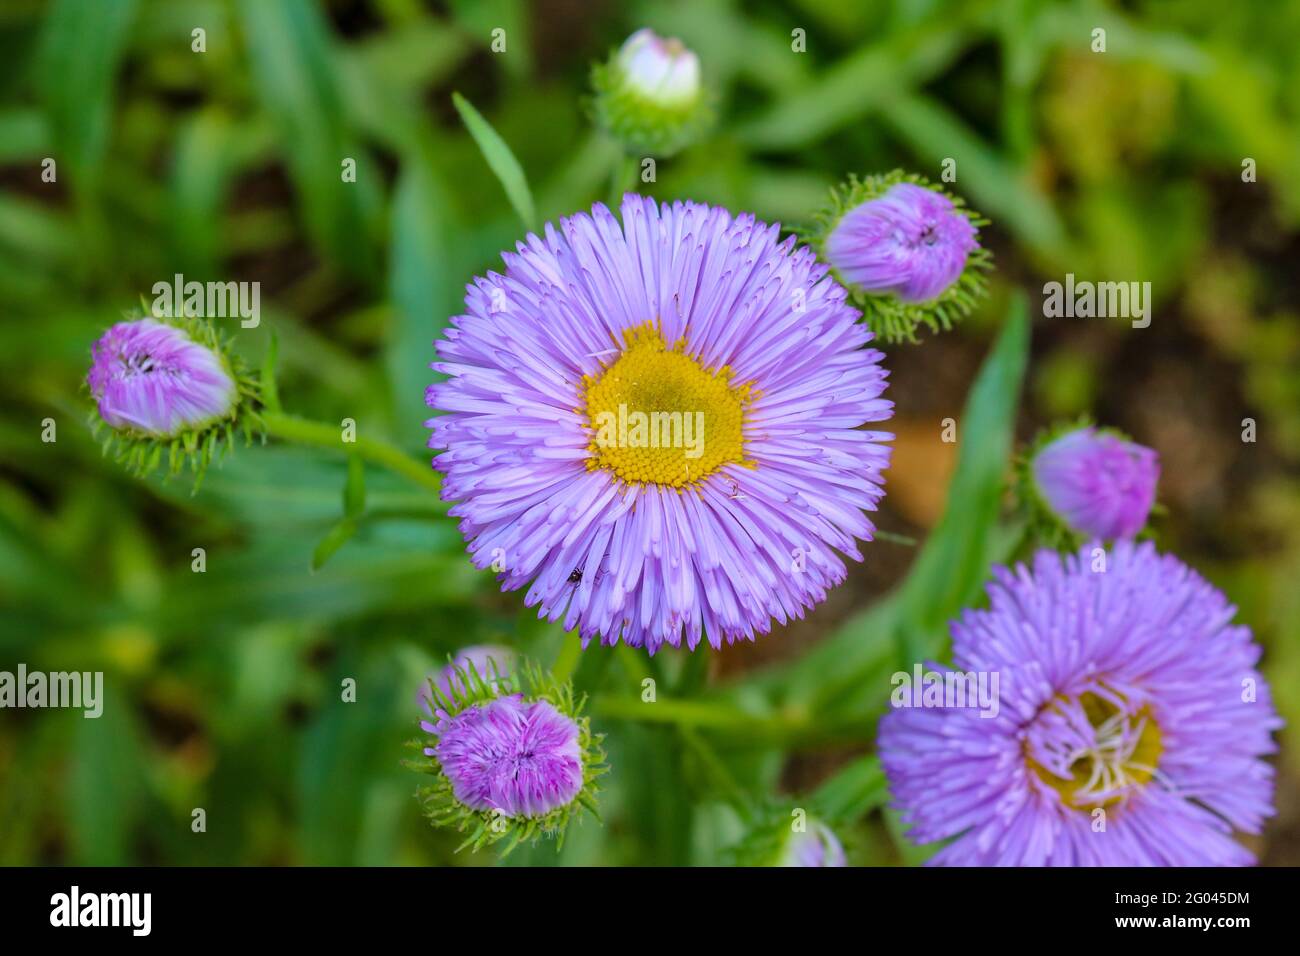 Purple aster in the center against natural background, top view, close-up. Stock Photo